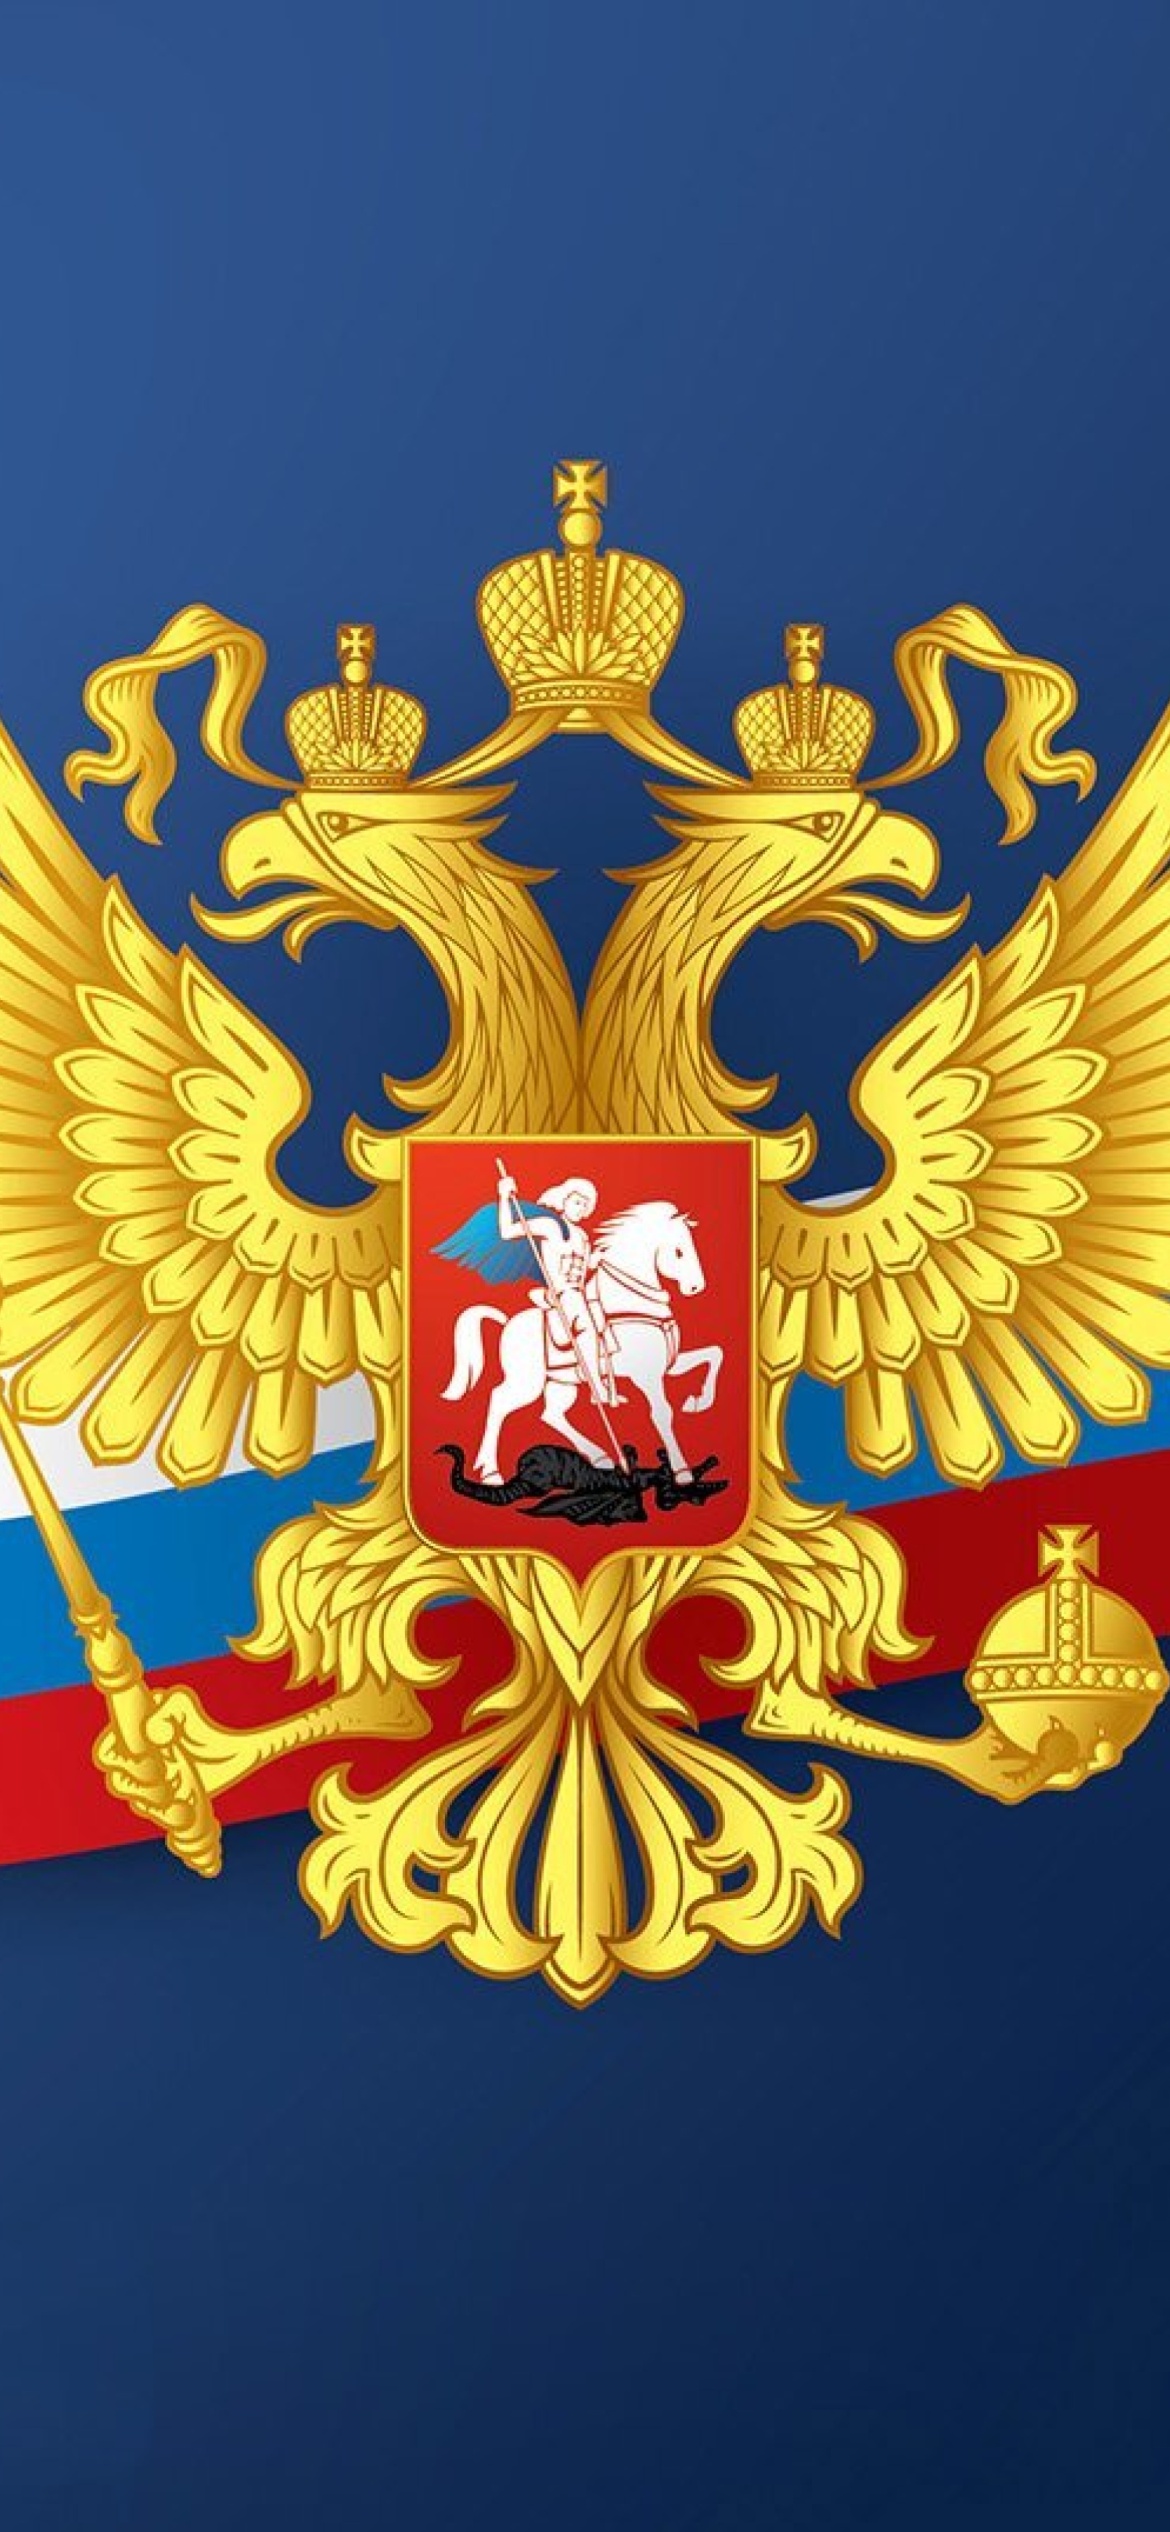 Russian coat of arms and flag wallpaper 1170x2532